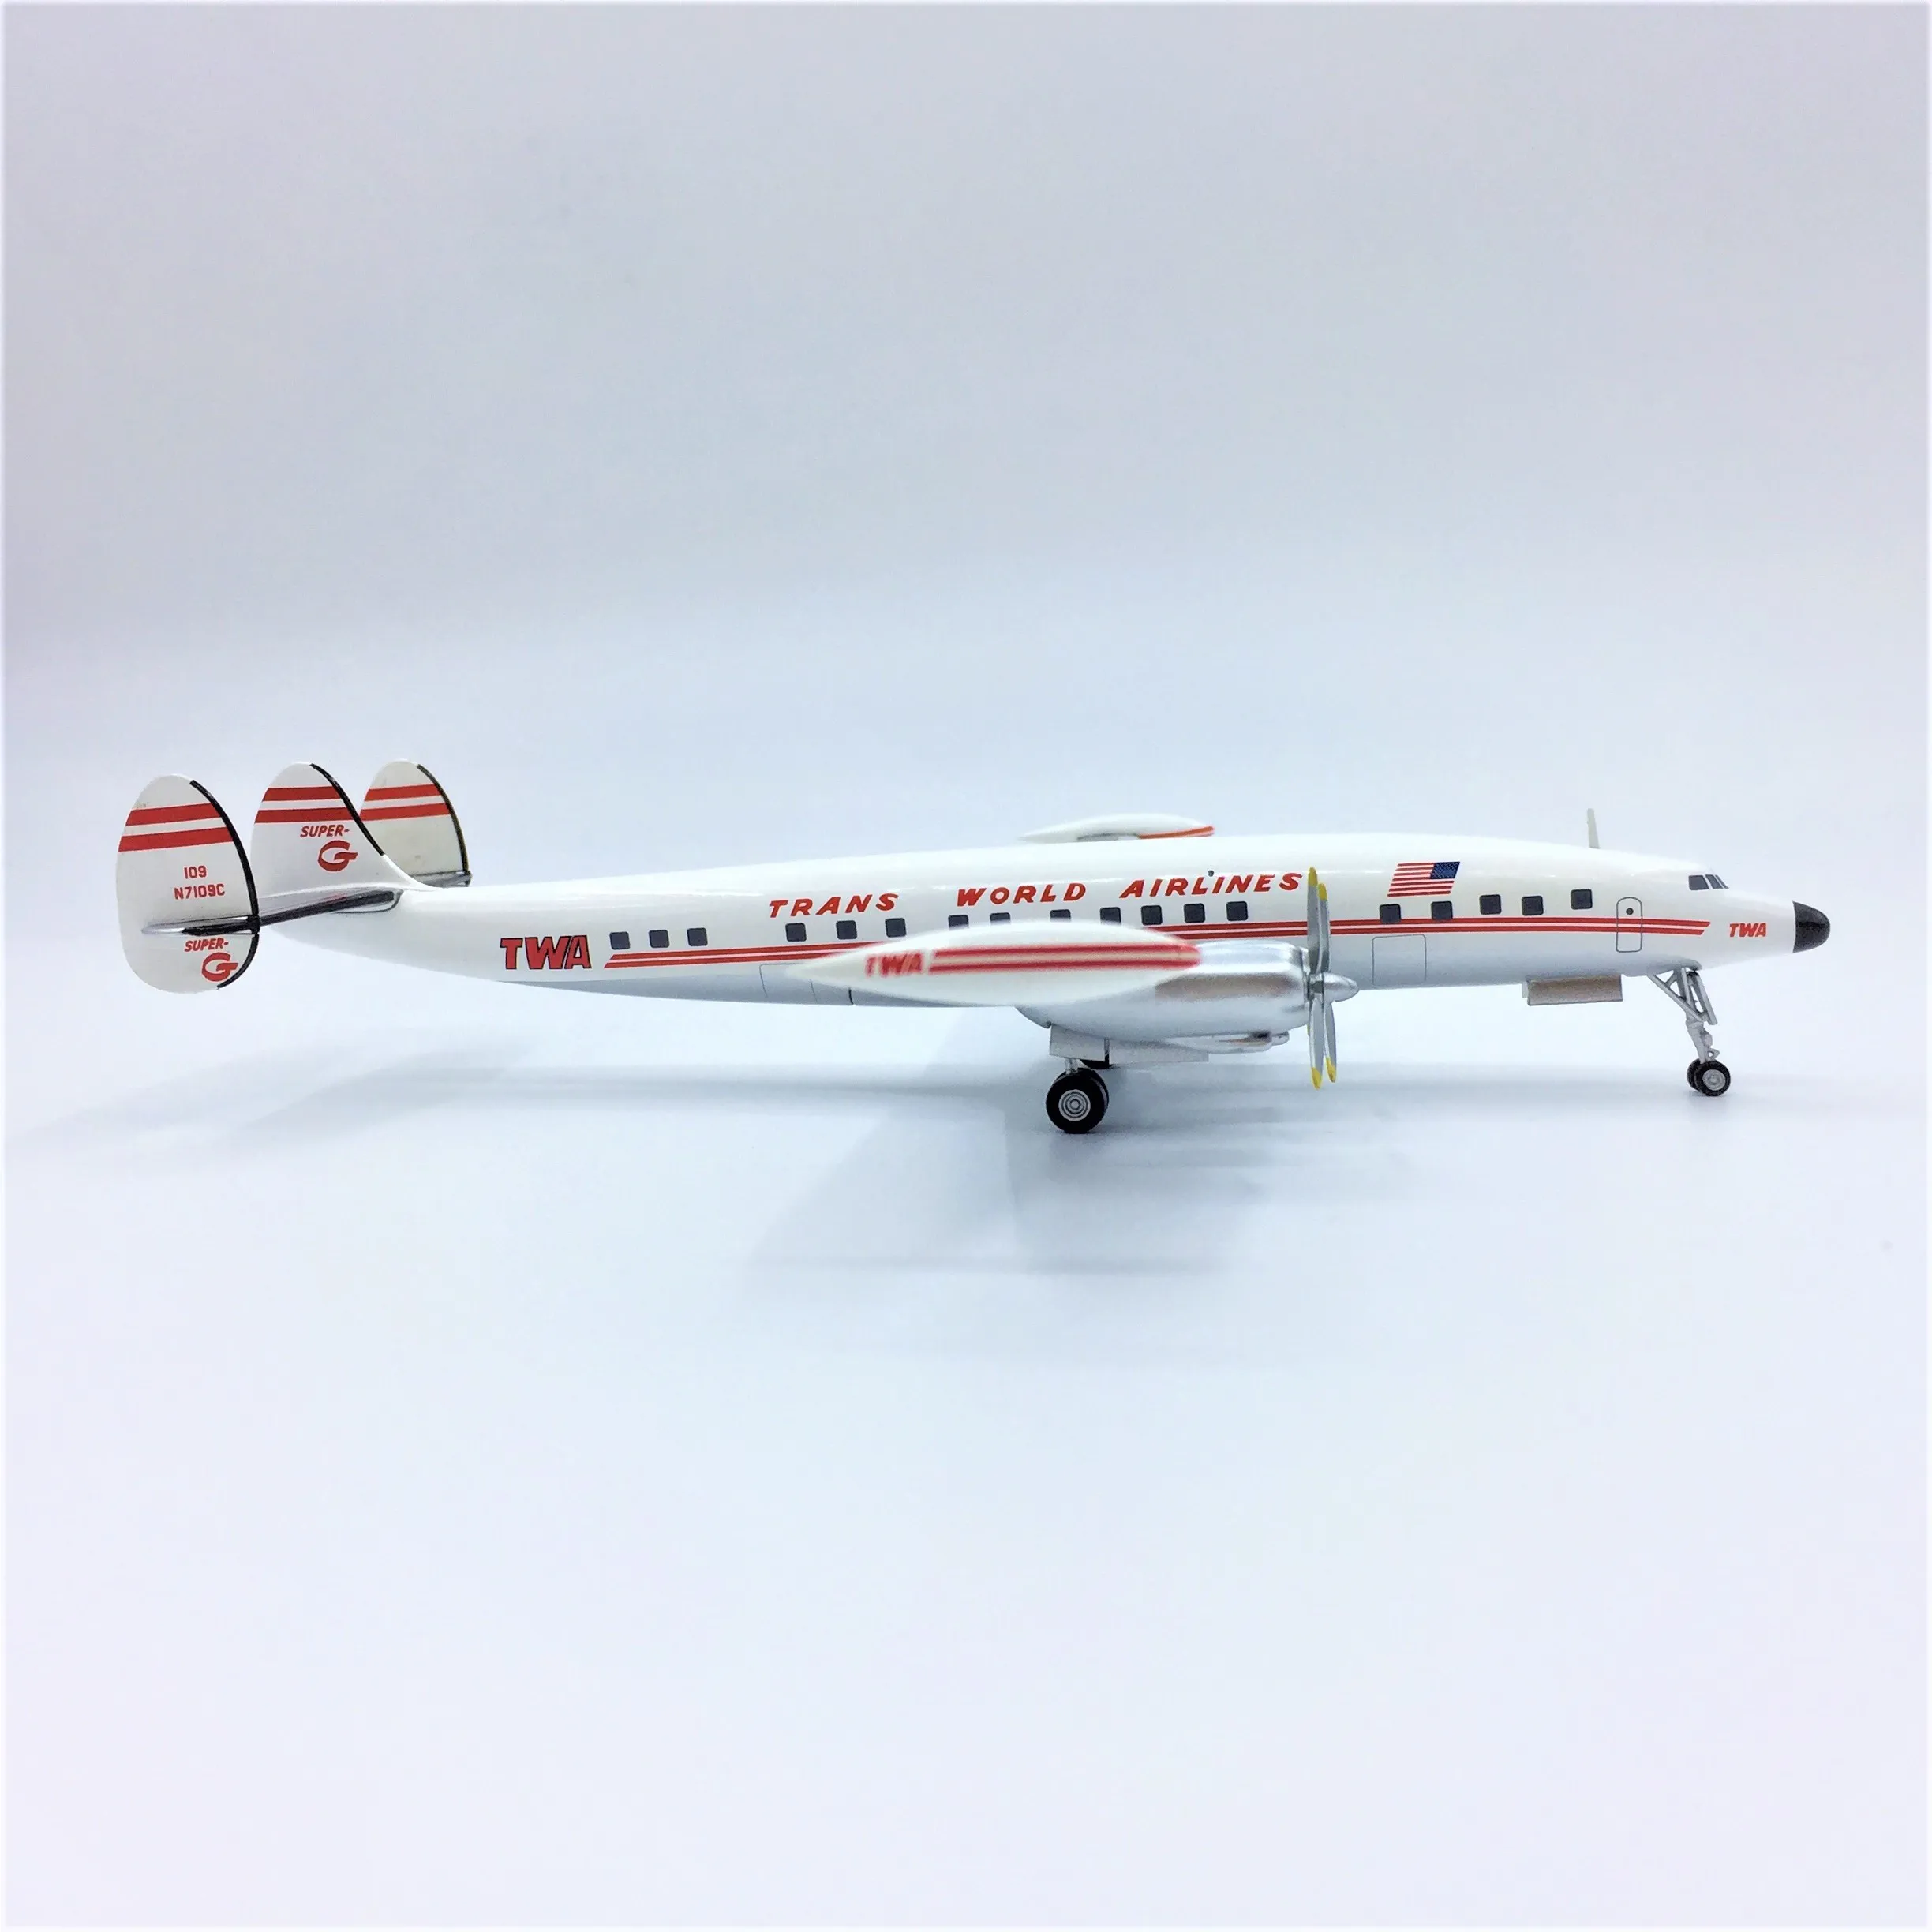 Trans World Airlines 200 Scale Lockheed L 1049 Super Constellation High Detailed Diecast Airplane Model For Sale Buy Aircraft Model Decorative Model Airplane Airplanes Working Model Product On Alibaba Com